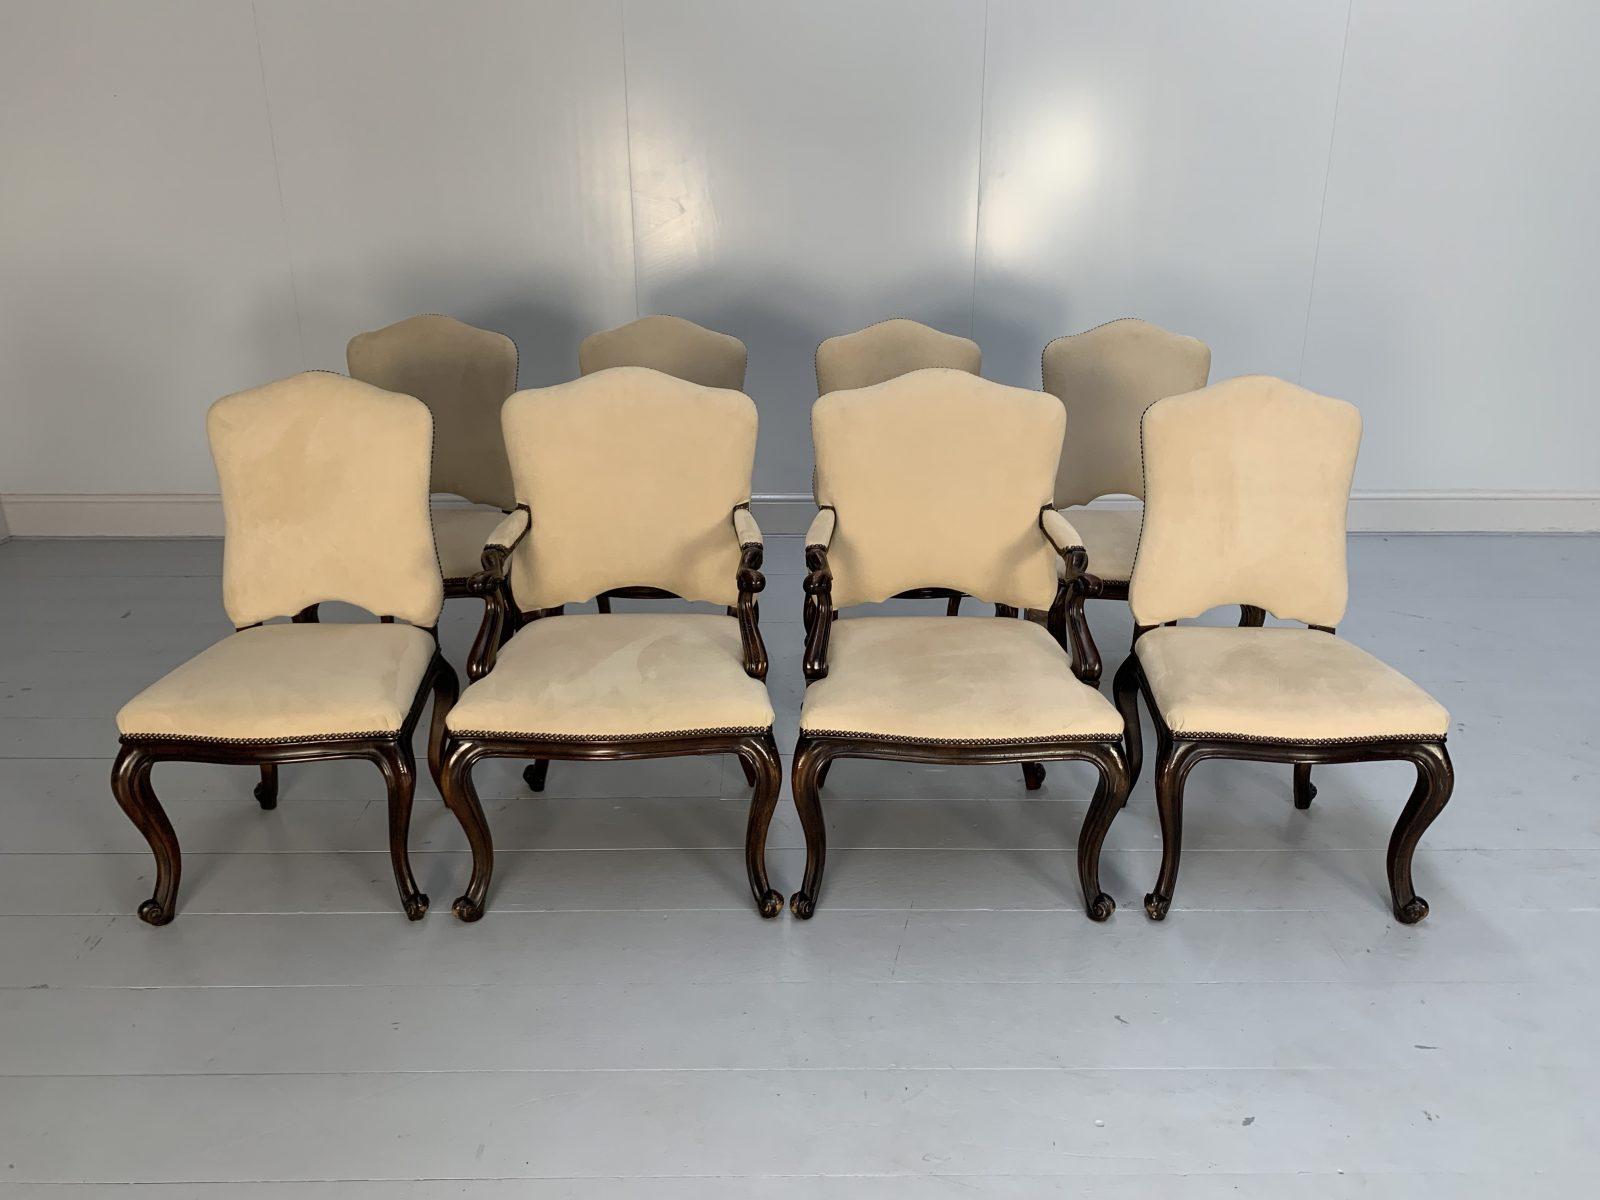 Contemporary Suite of 8 Ralph Lauren “Noble Estate” Dining Chairs in Ivory Suede For Sale